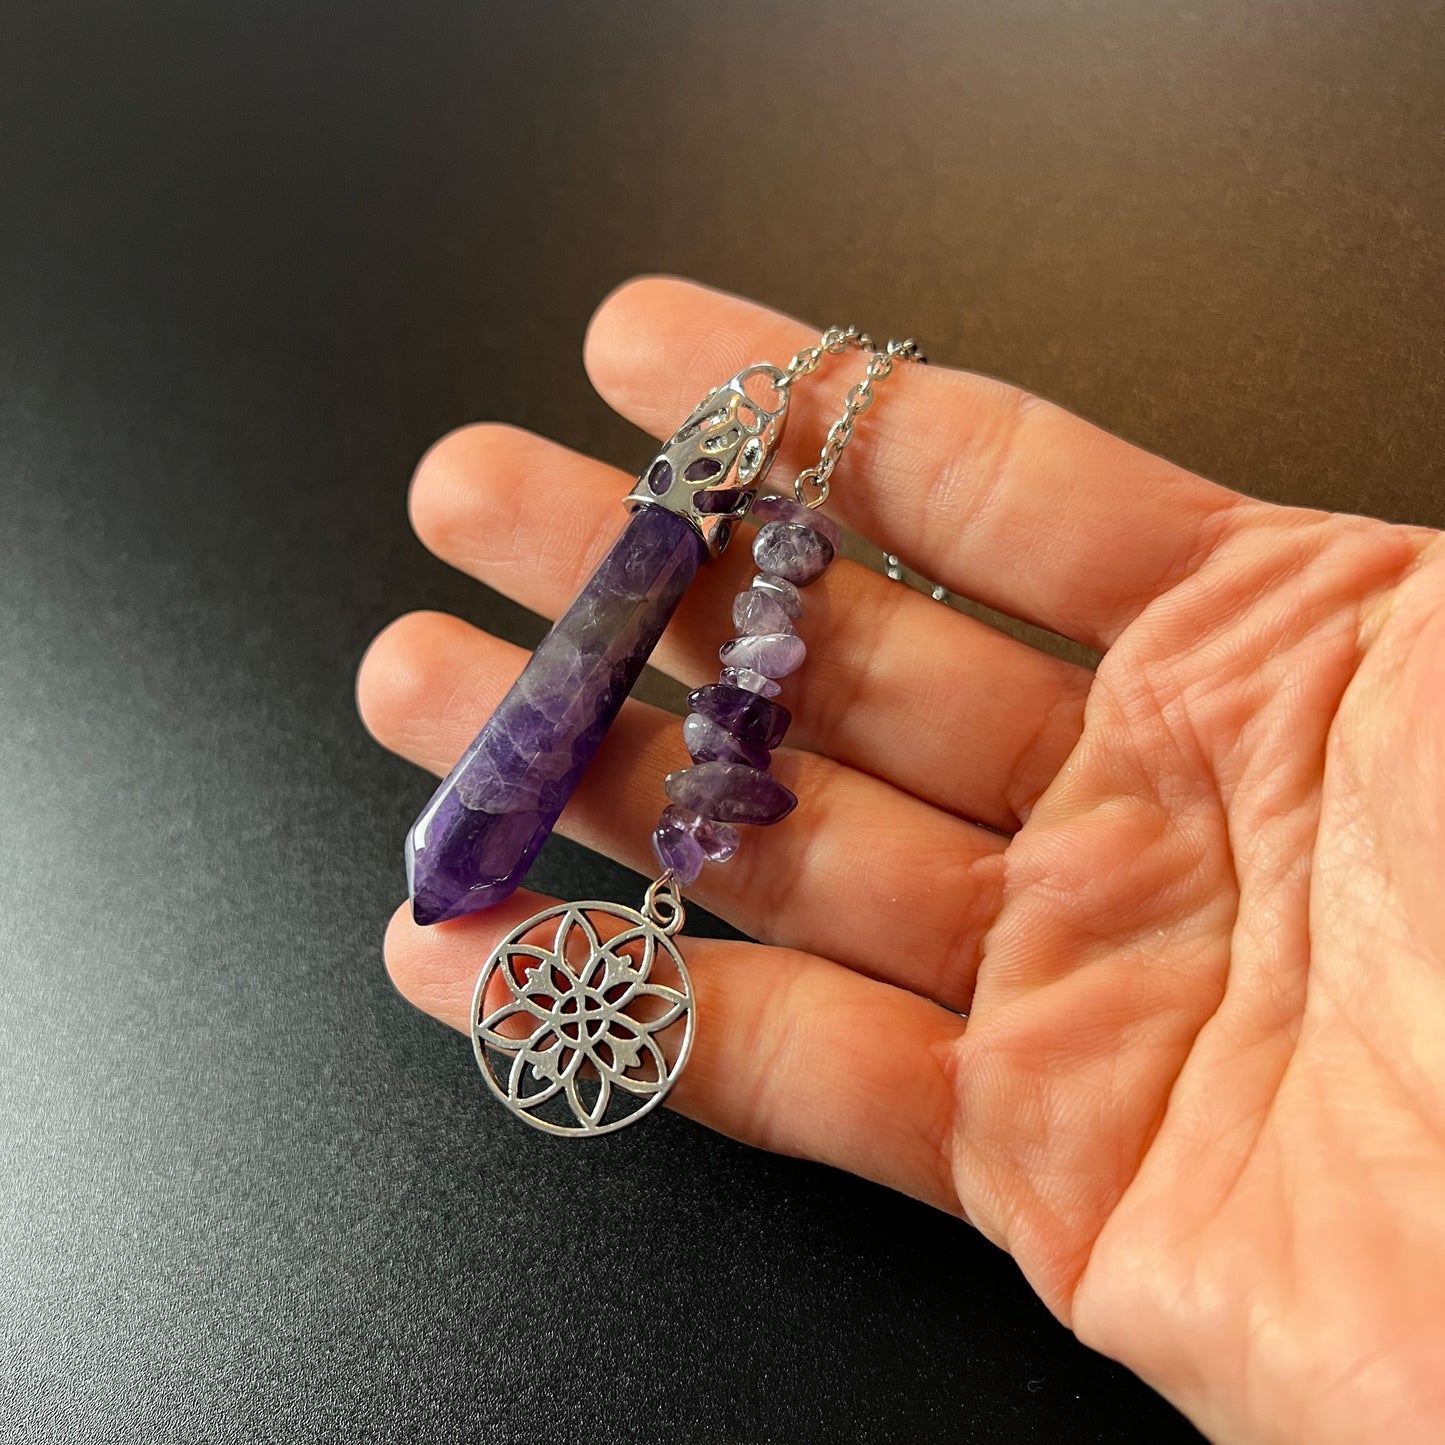 Amethyst and floral symbol pendulum - The French Witch shop